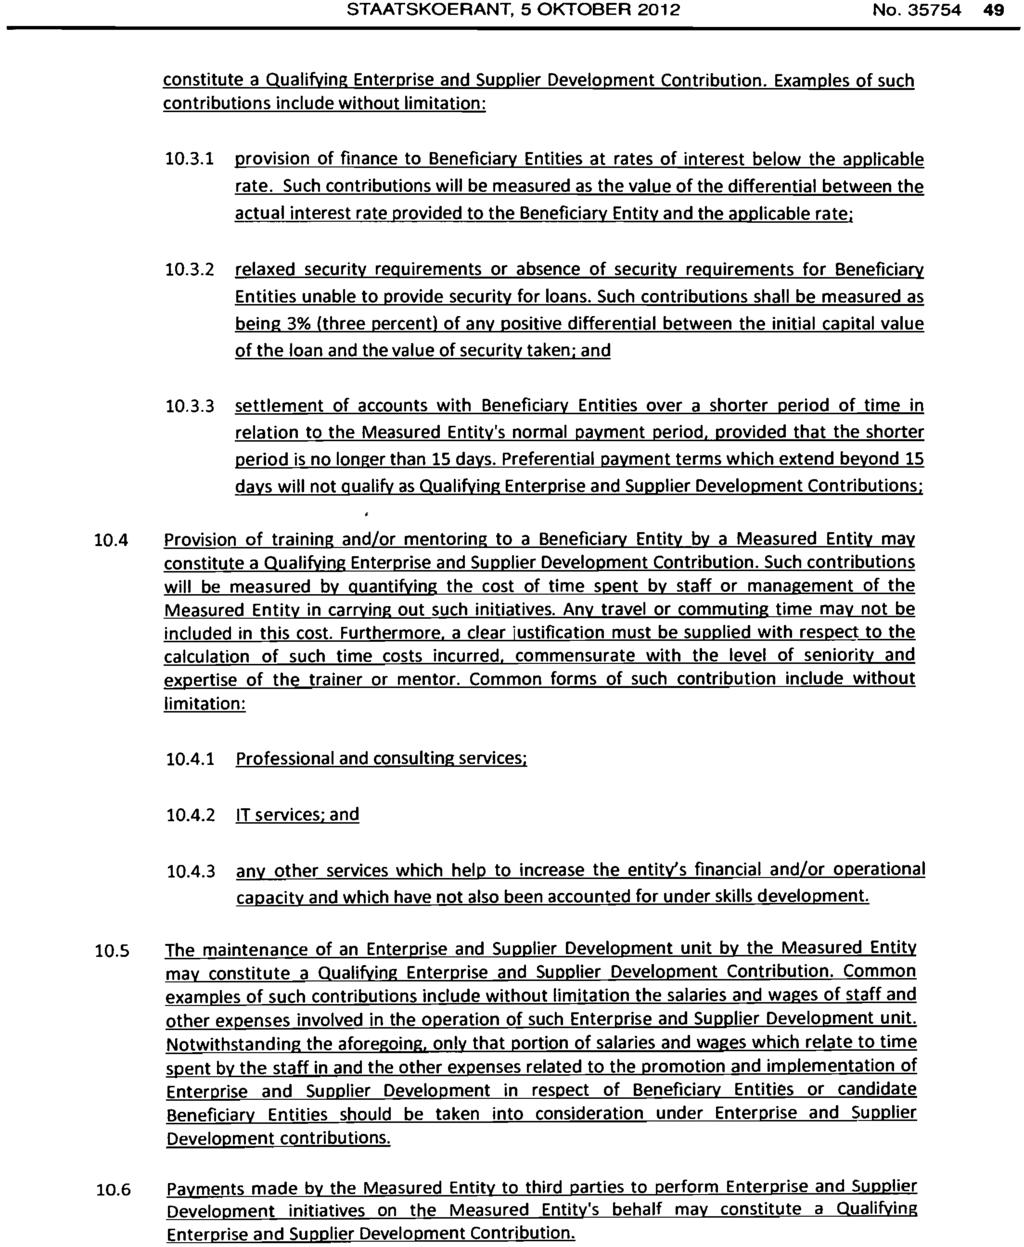 STAATSKOERANT, 5 OKTOBER 2012 No.35754 49 constitute a Qualifying Enterprise and Supplier Development Contribution. Examples of such contributions include without limitation: 10.3.1 provision of finance to Beneficiary Entities at rates of interest below the applicable rate.